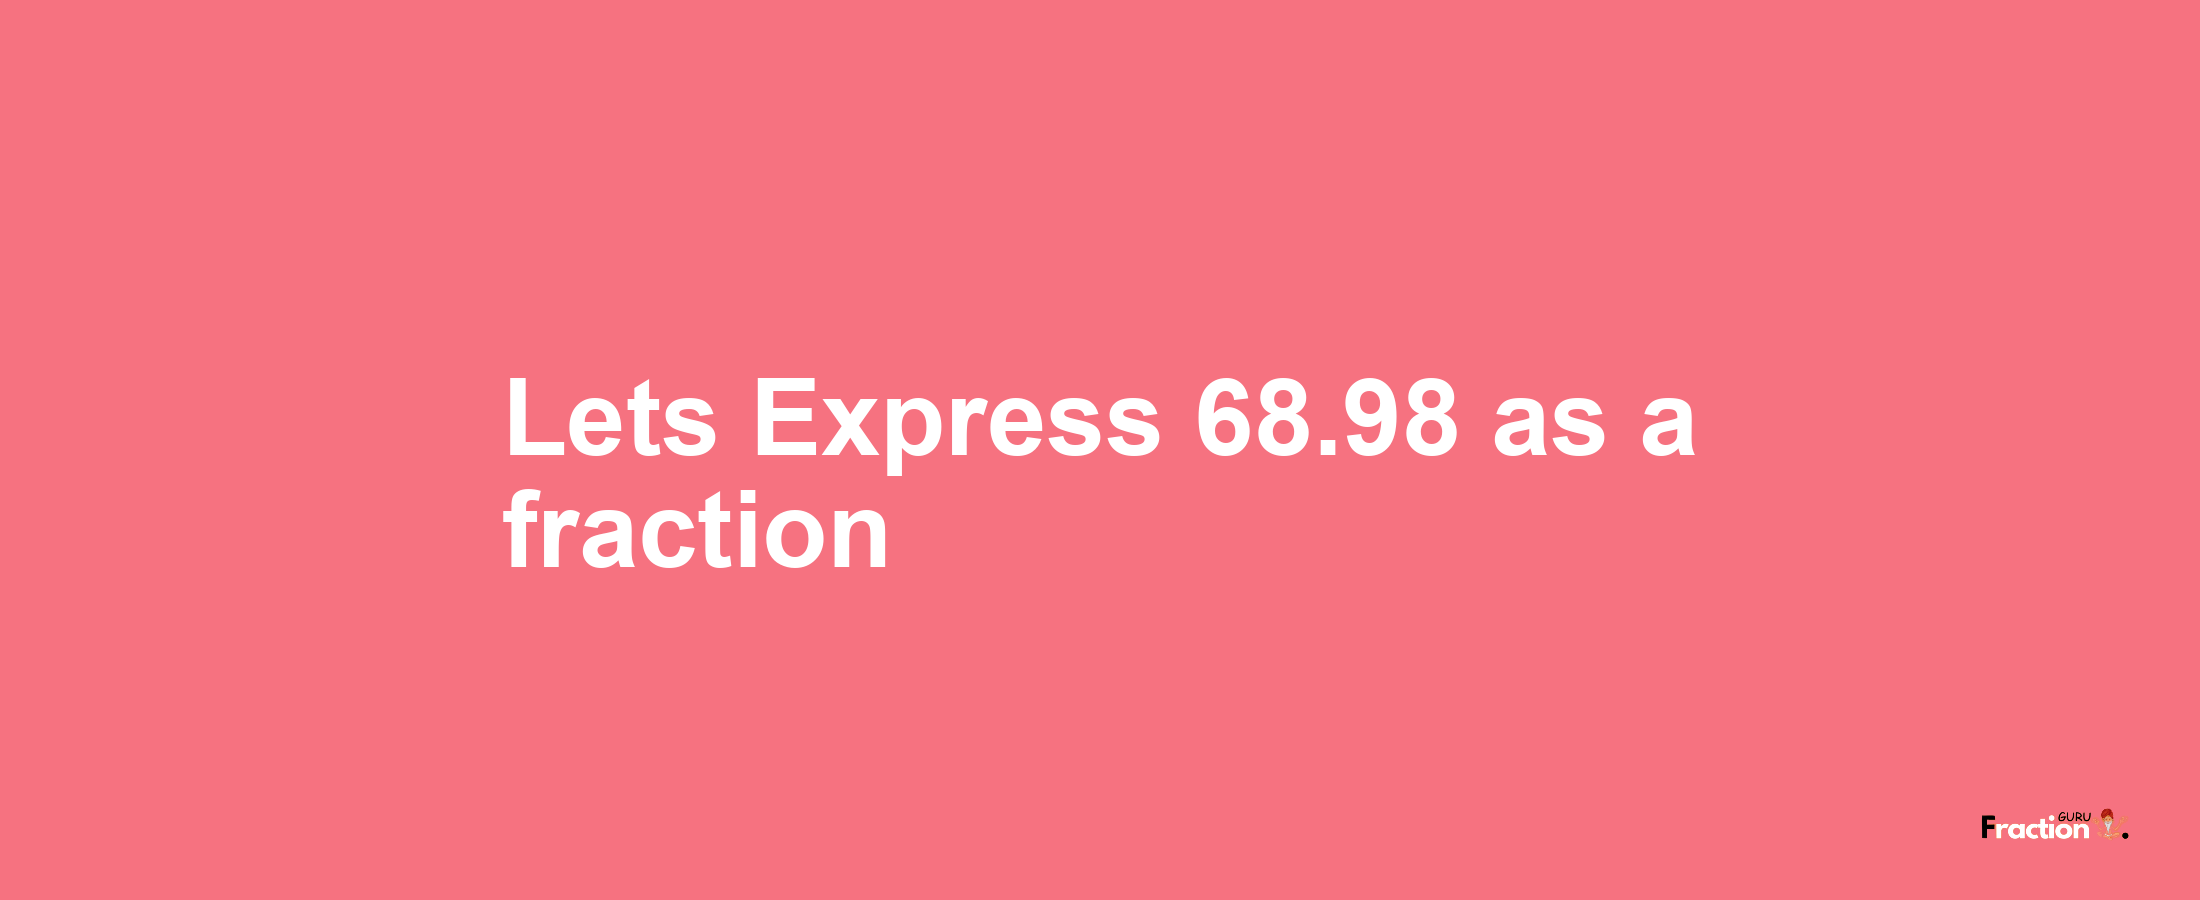 Lets Express 68.98 as afraction